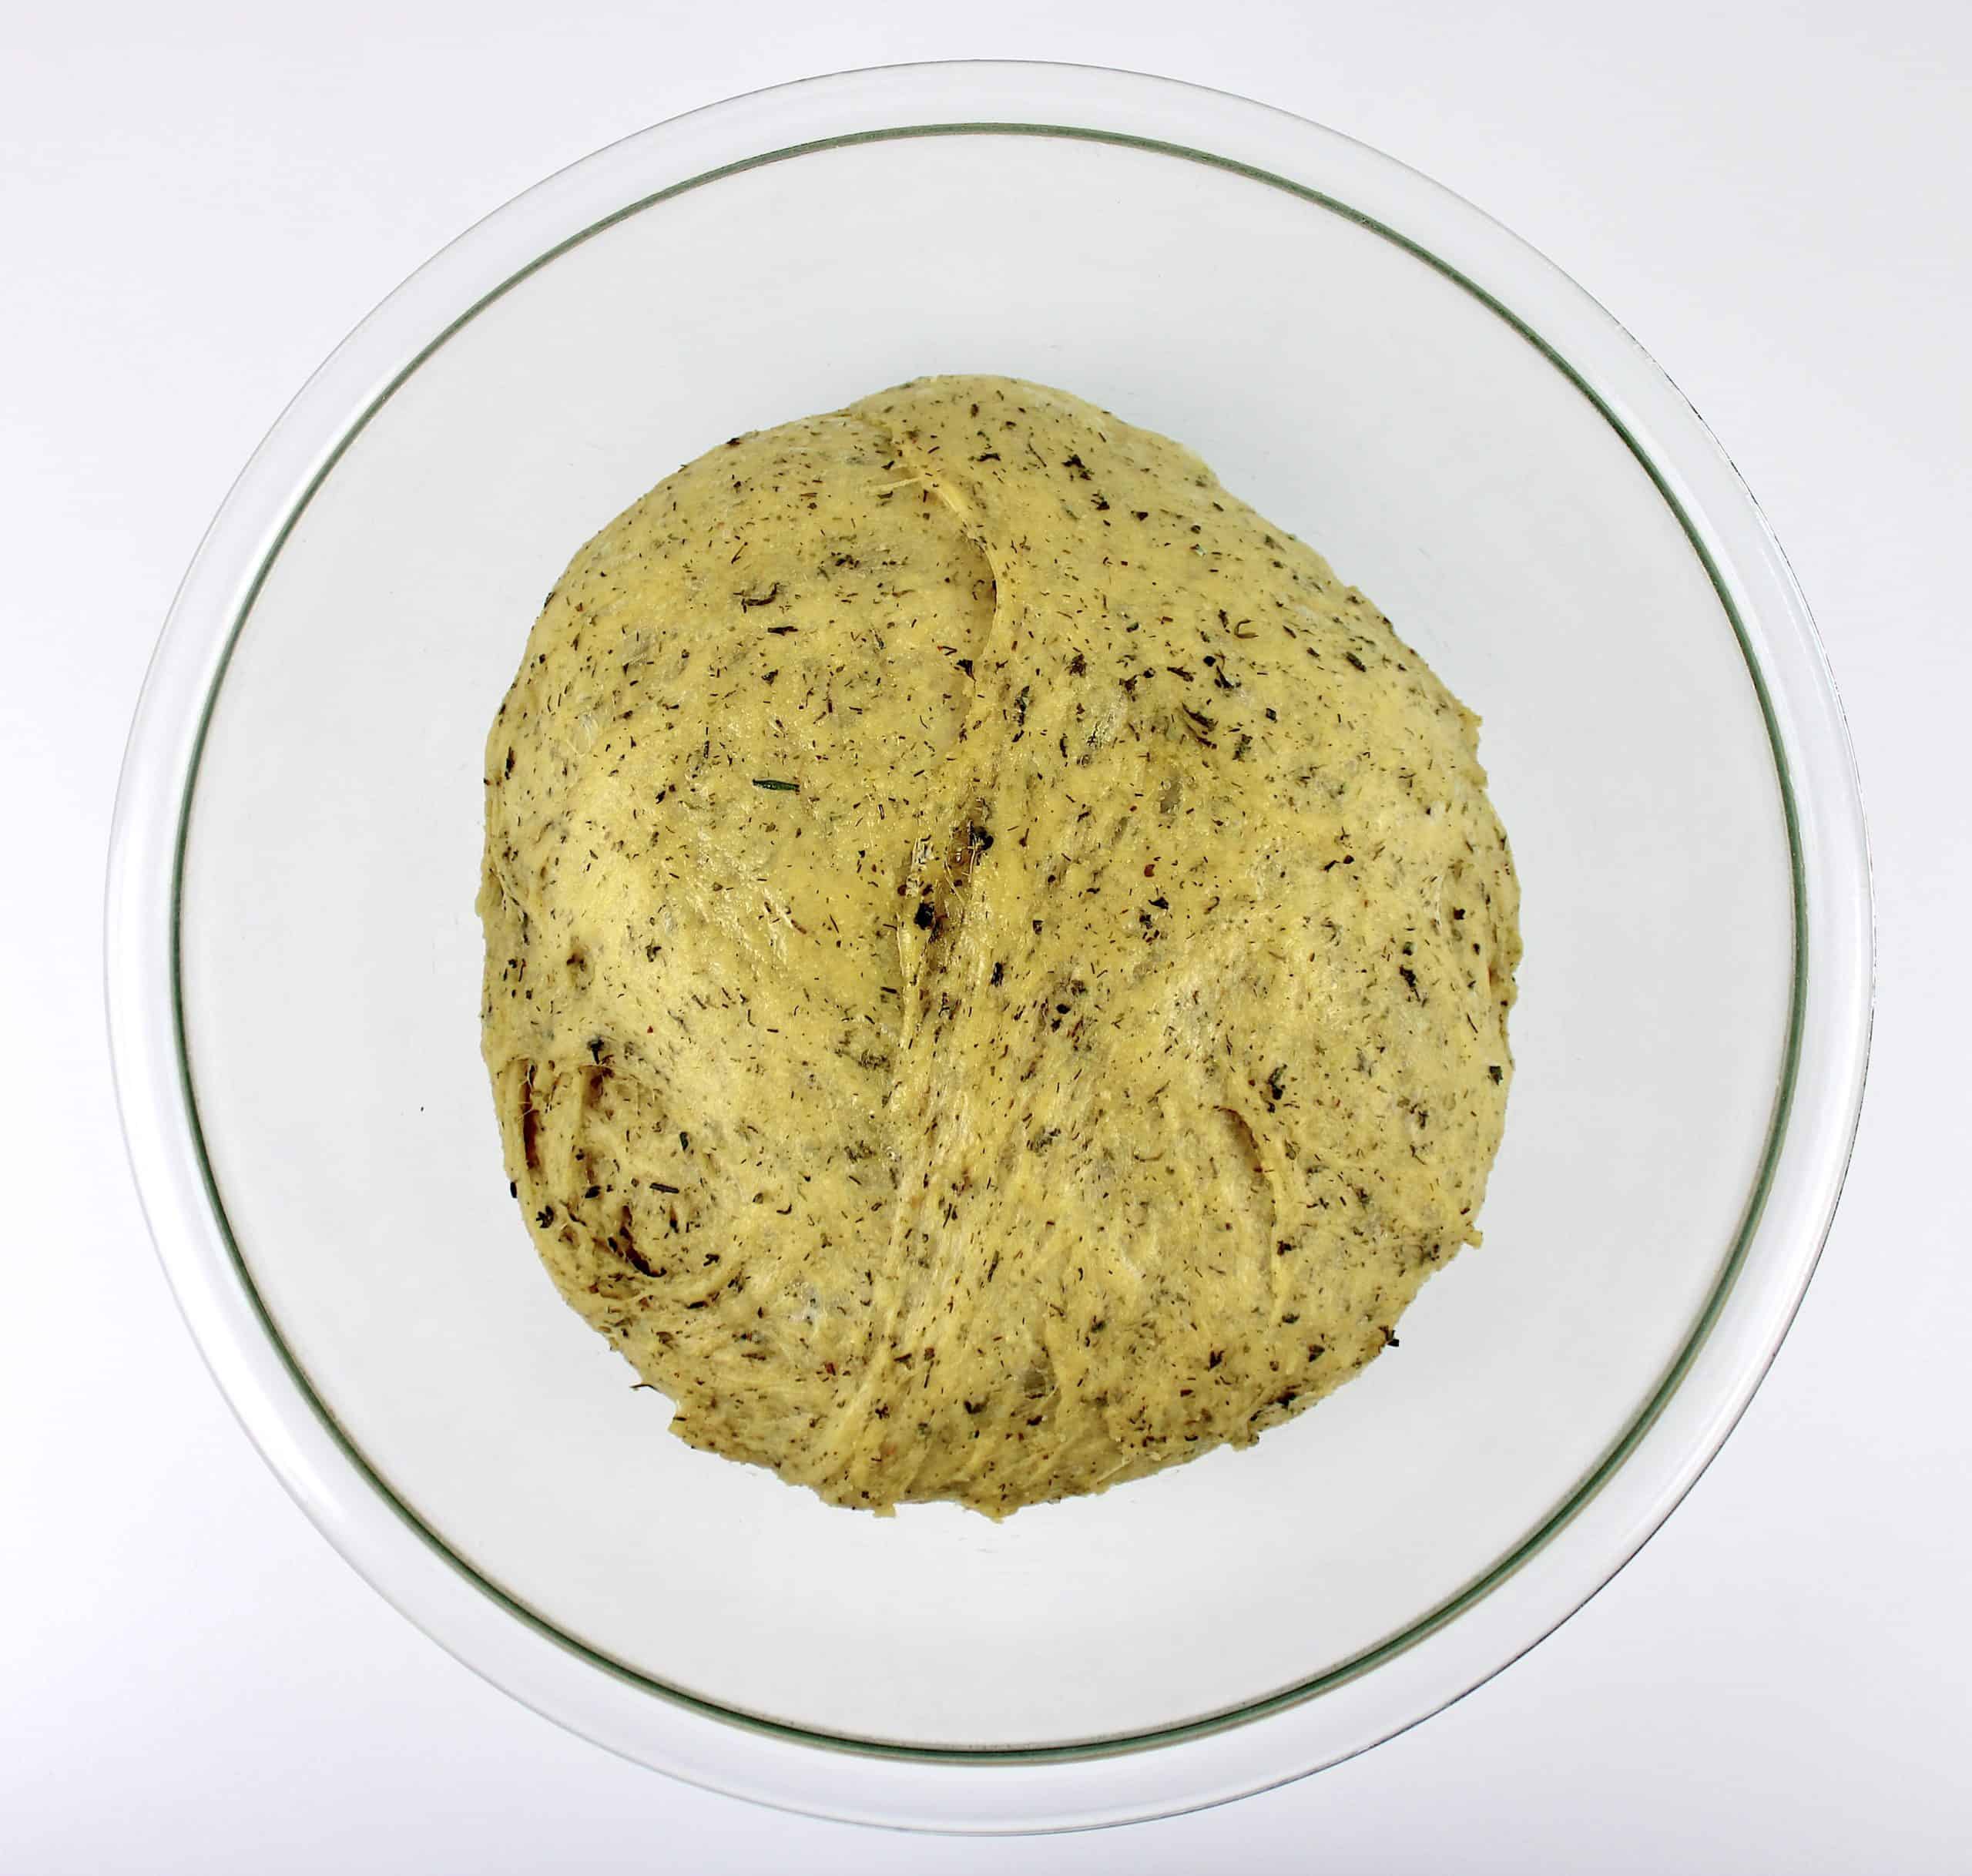 Keto Braided Herb Bread dough ball in glass mixing bowl